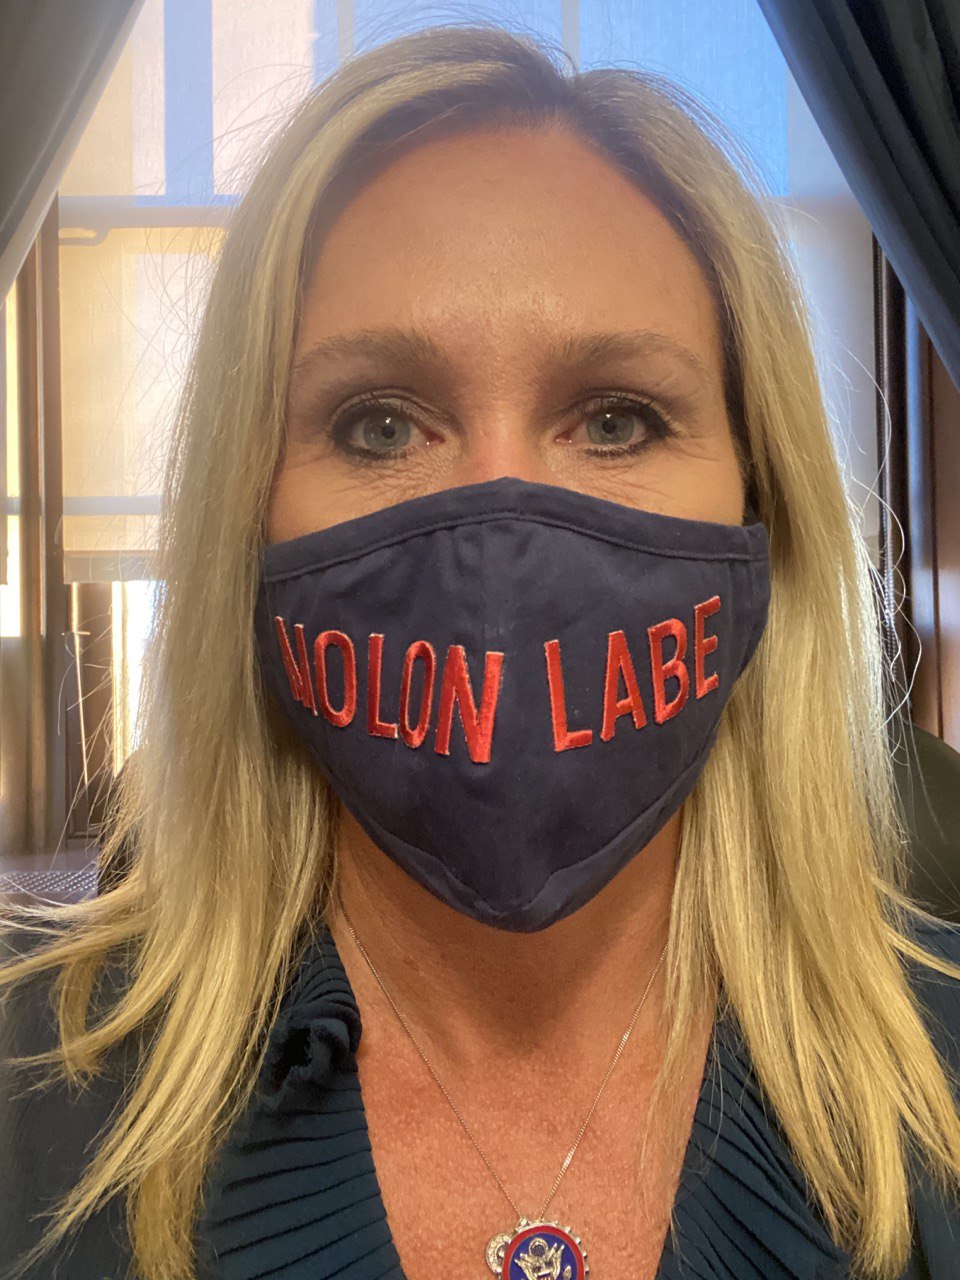 Molon Labe meaning: Marjorie Taylor Greene's mask message decoded